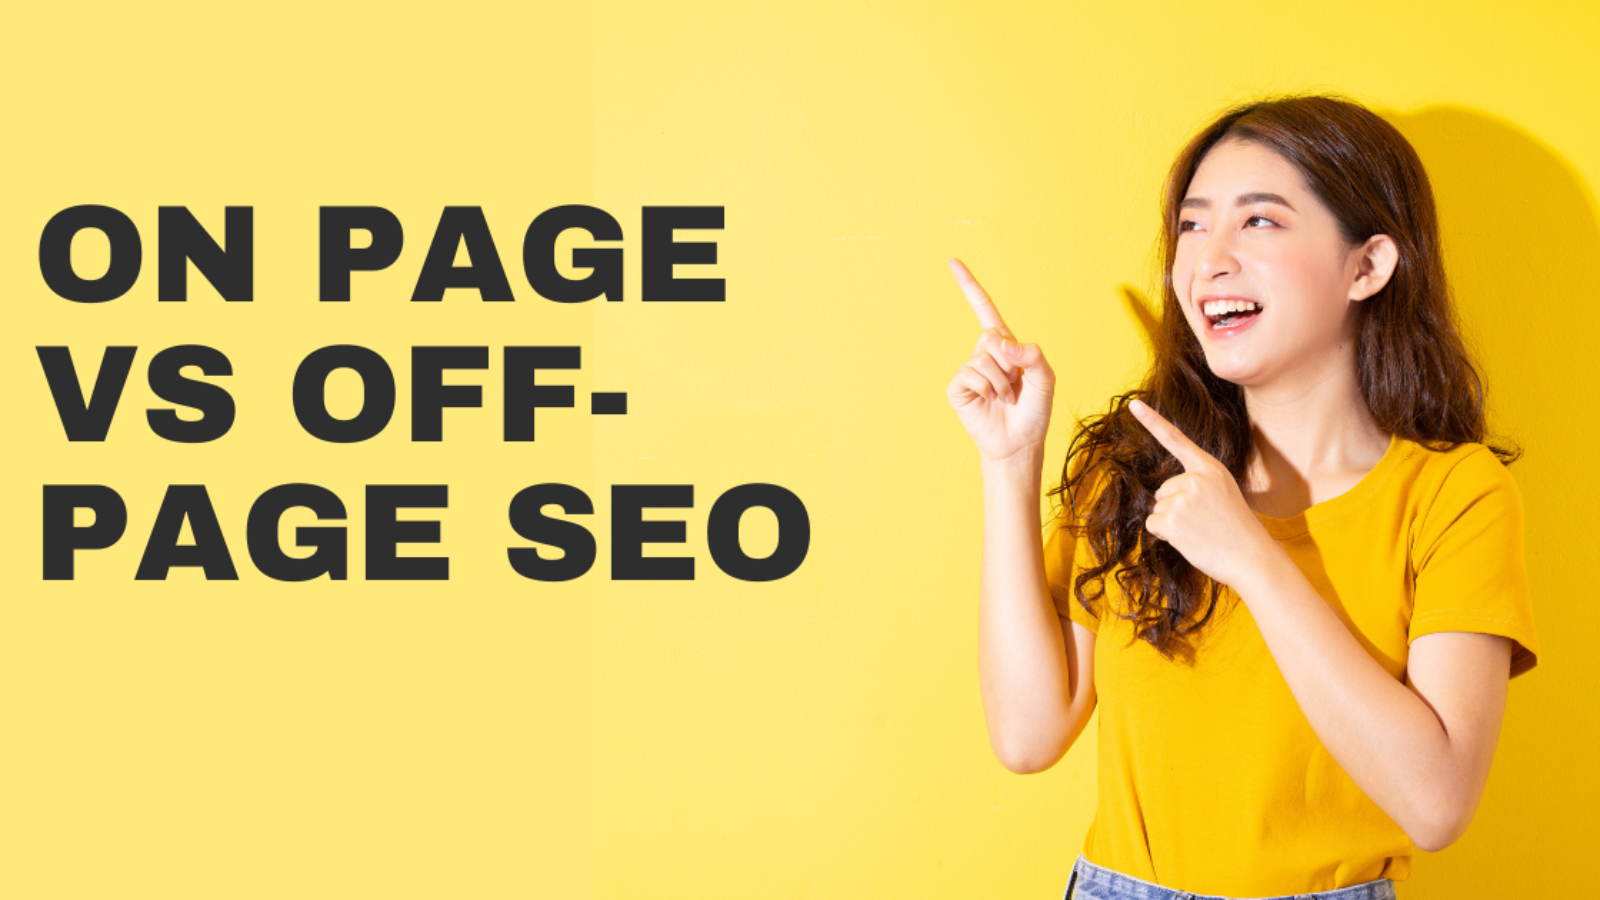 What are the main differences between on-page and off-page SEO